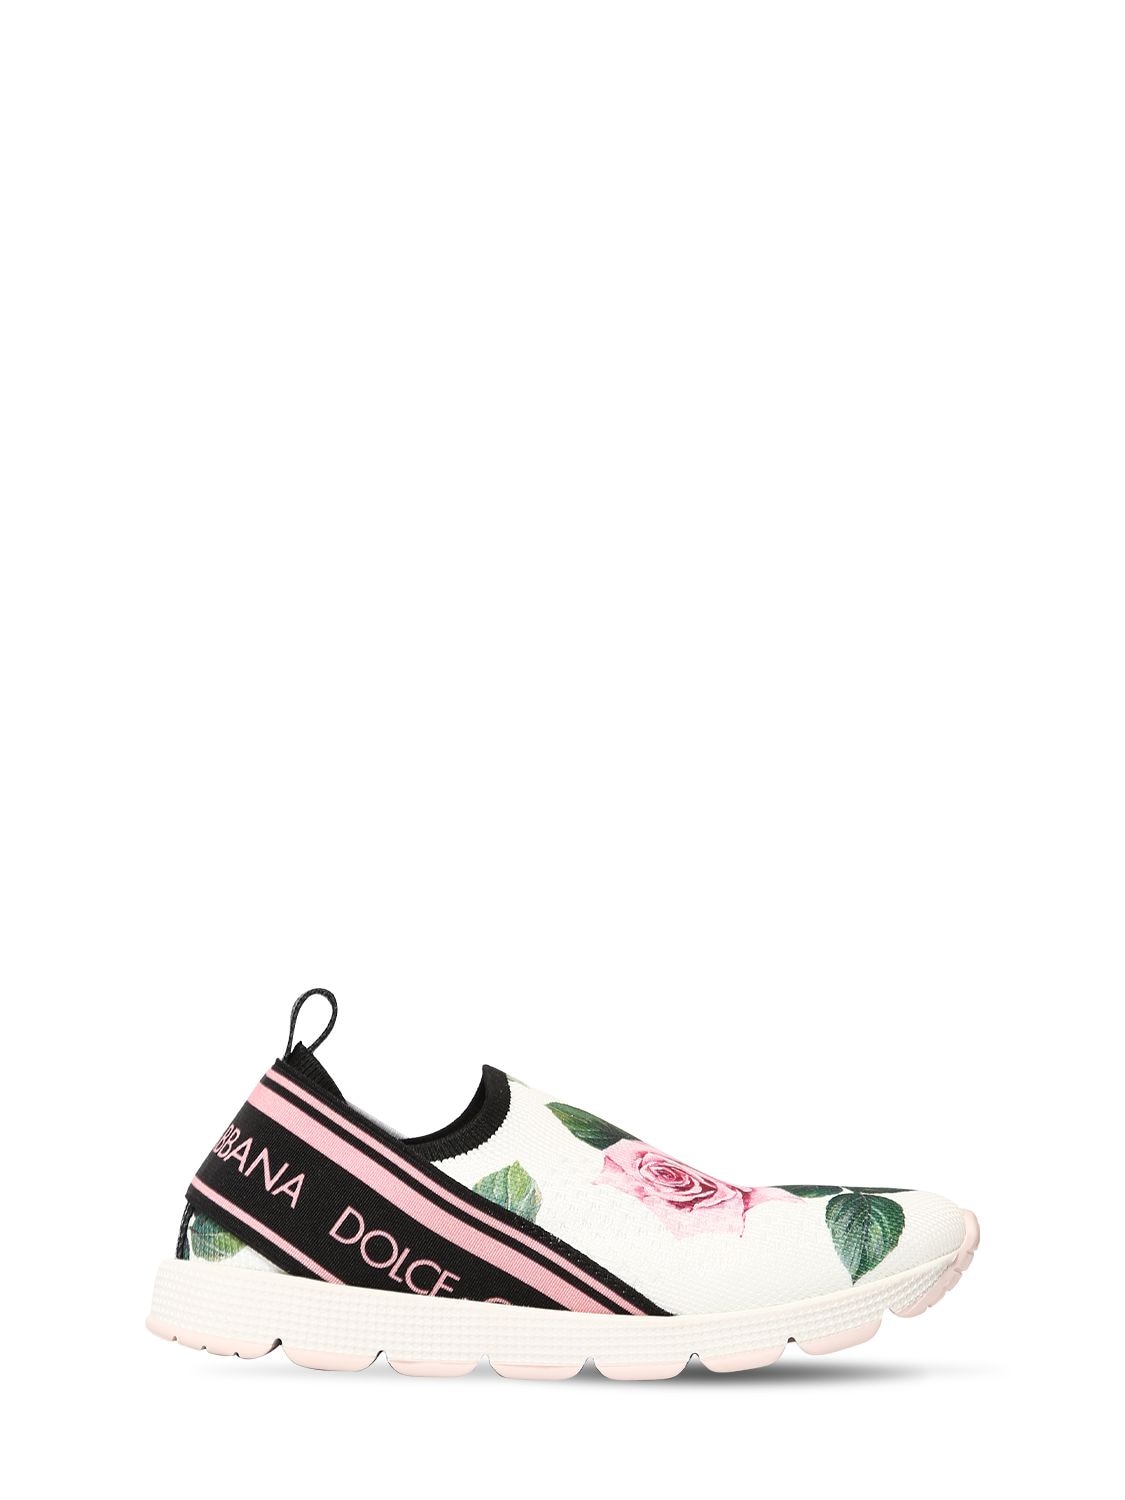 DOLCE & GABBANA ROSE PRINTED KNIT SLIP-ON trainers,71I6T9035-SEE5NKM1